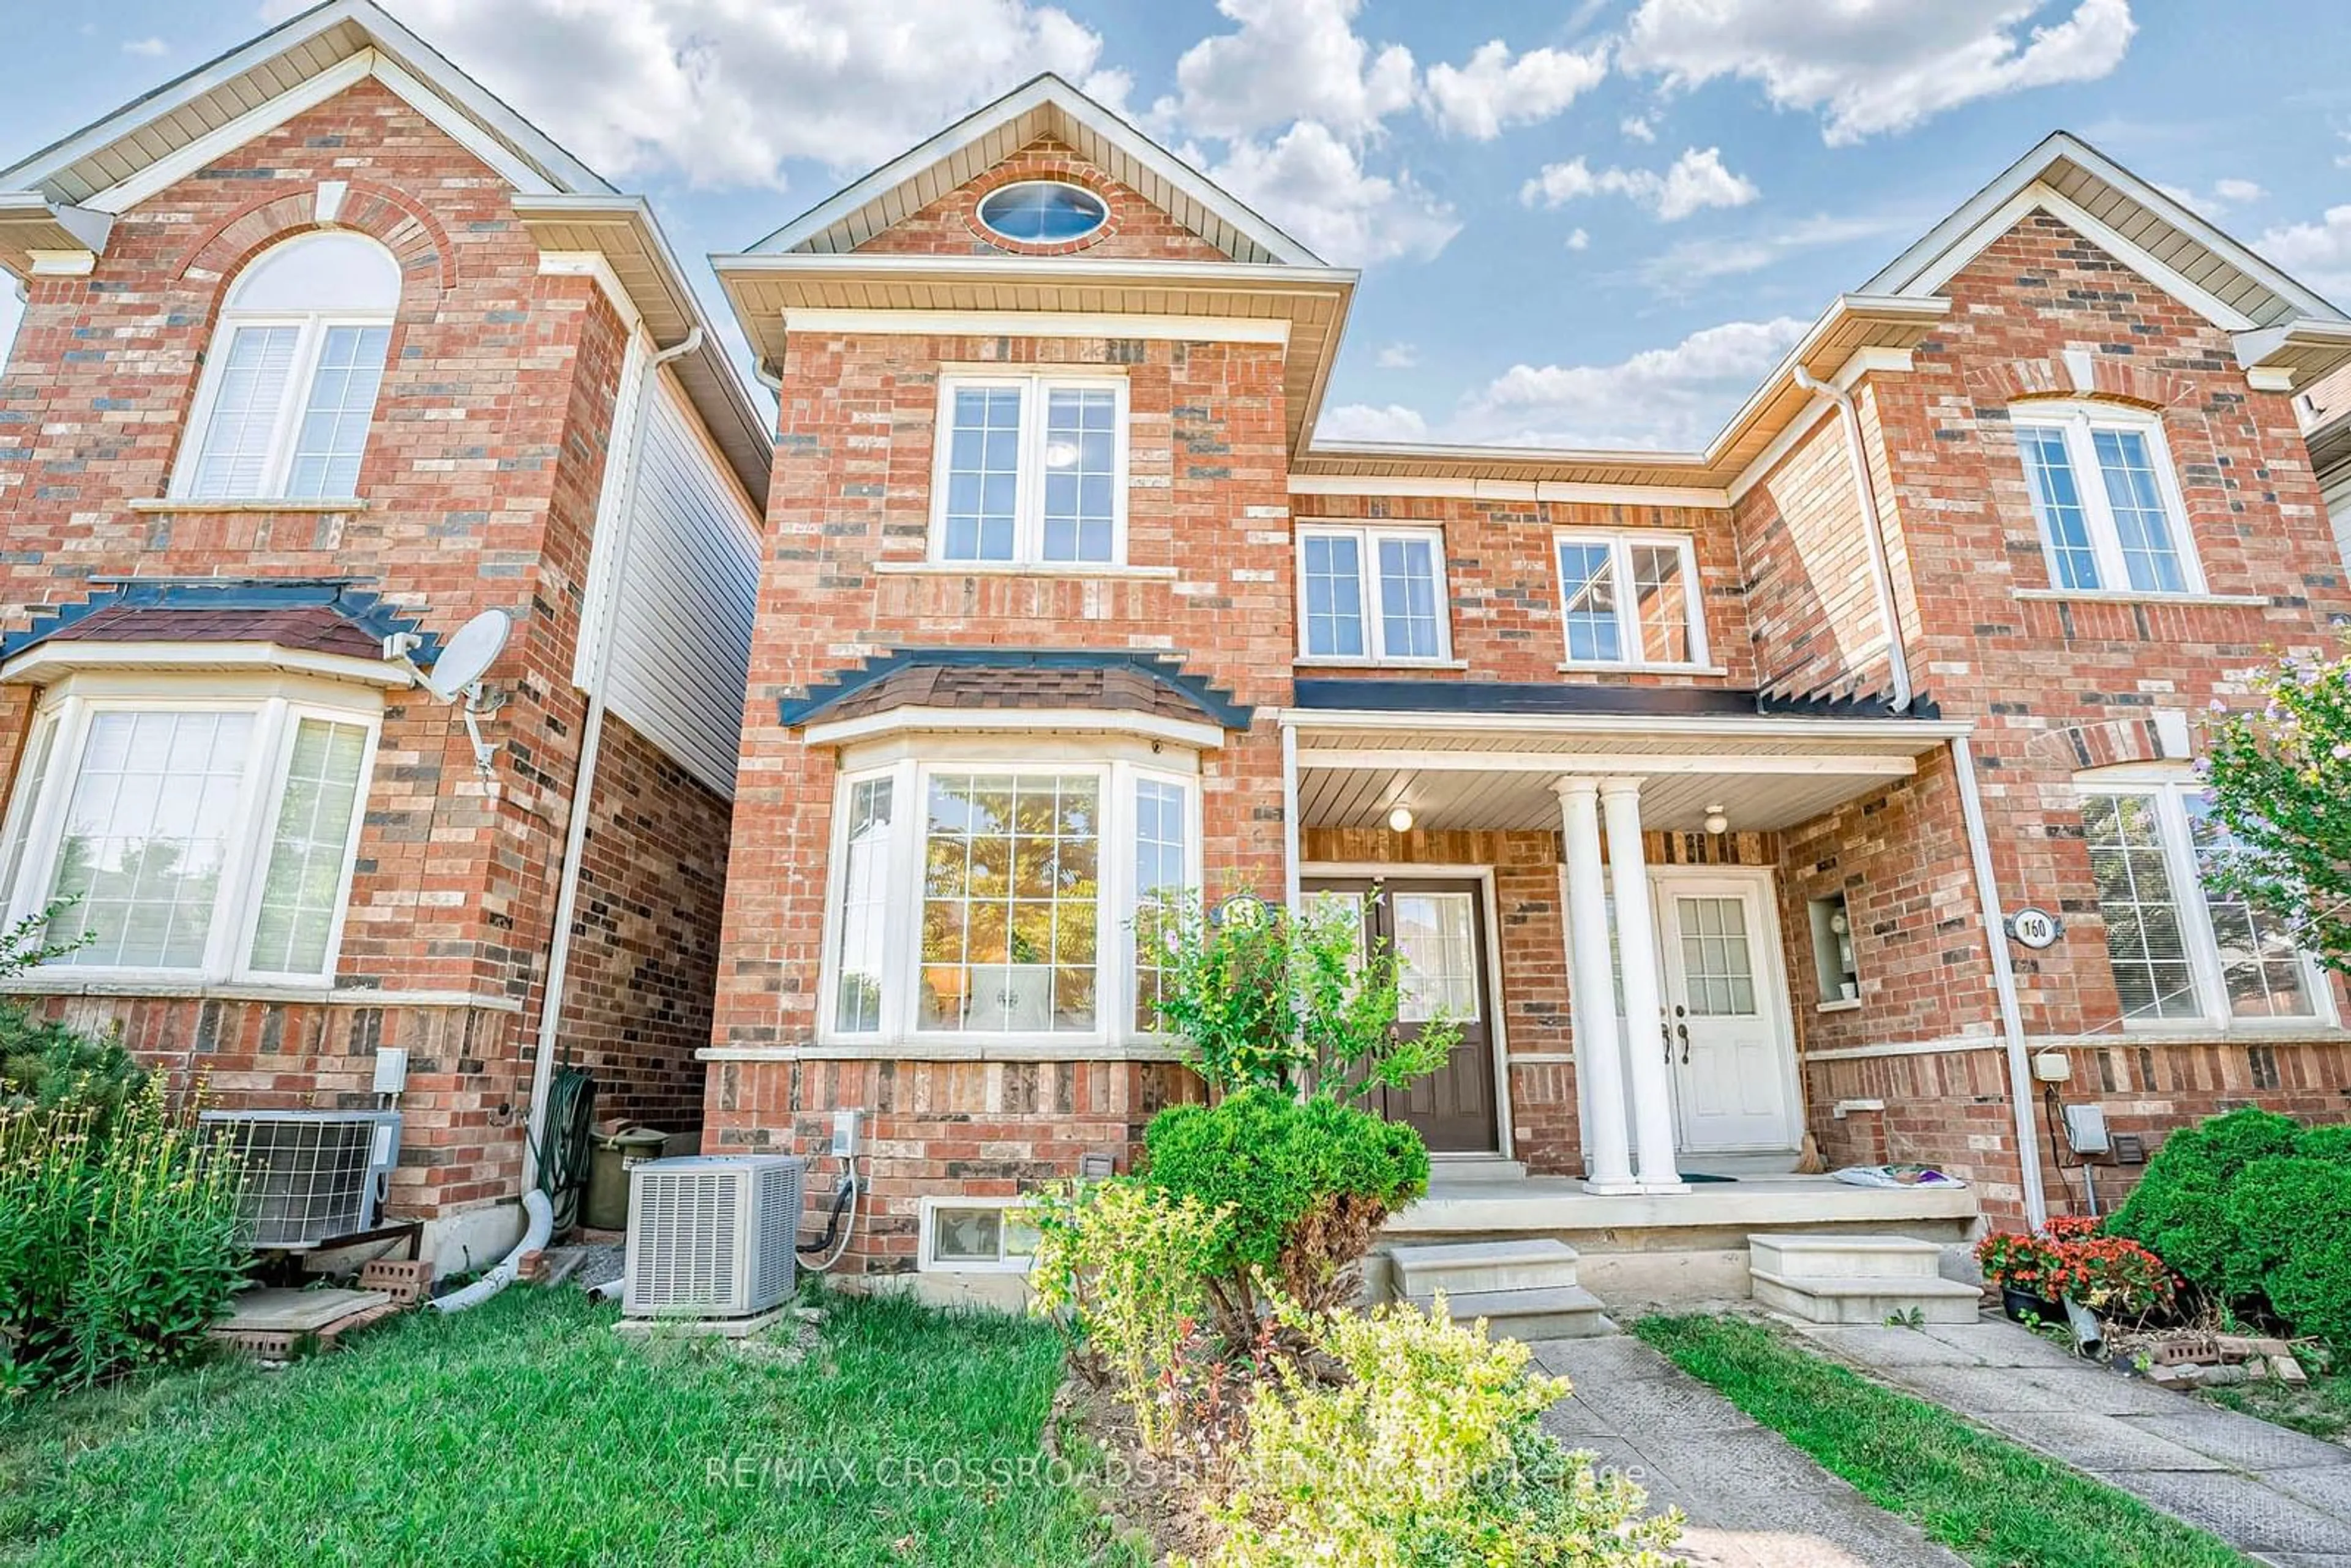 Home with brick exterior material for 158 South Unionville Ave, Markham Ontario L3R 5X6